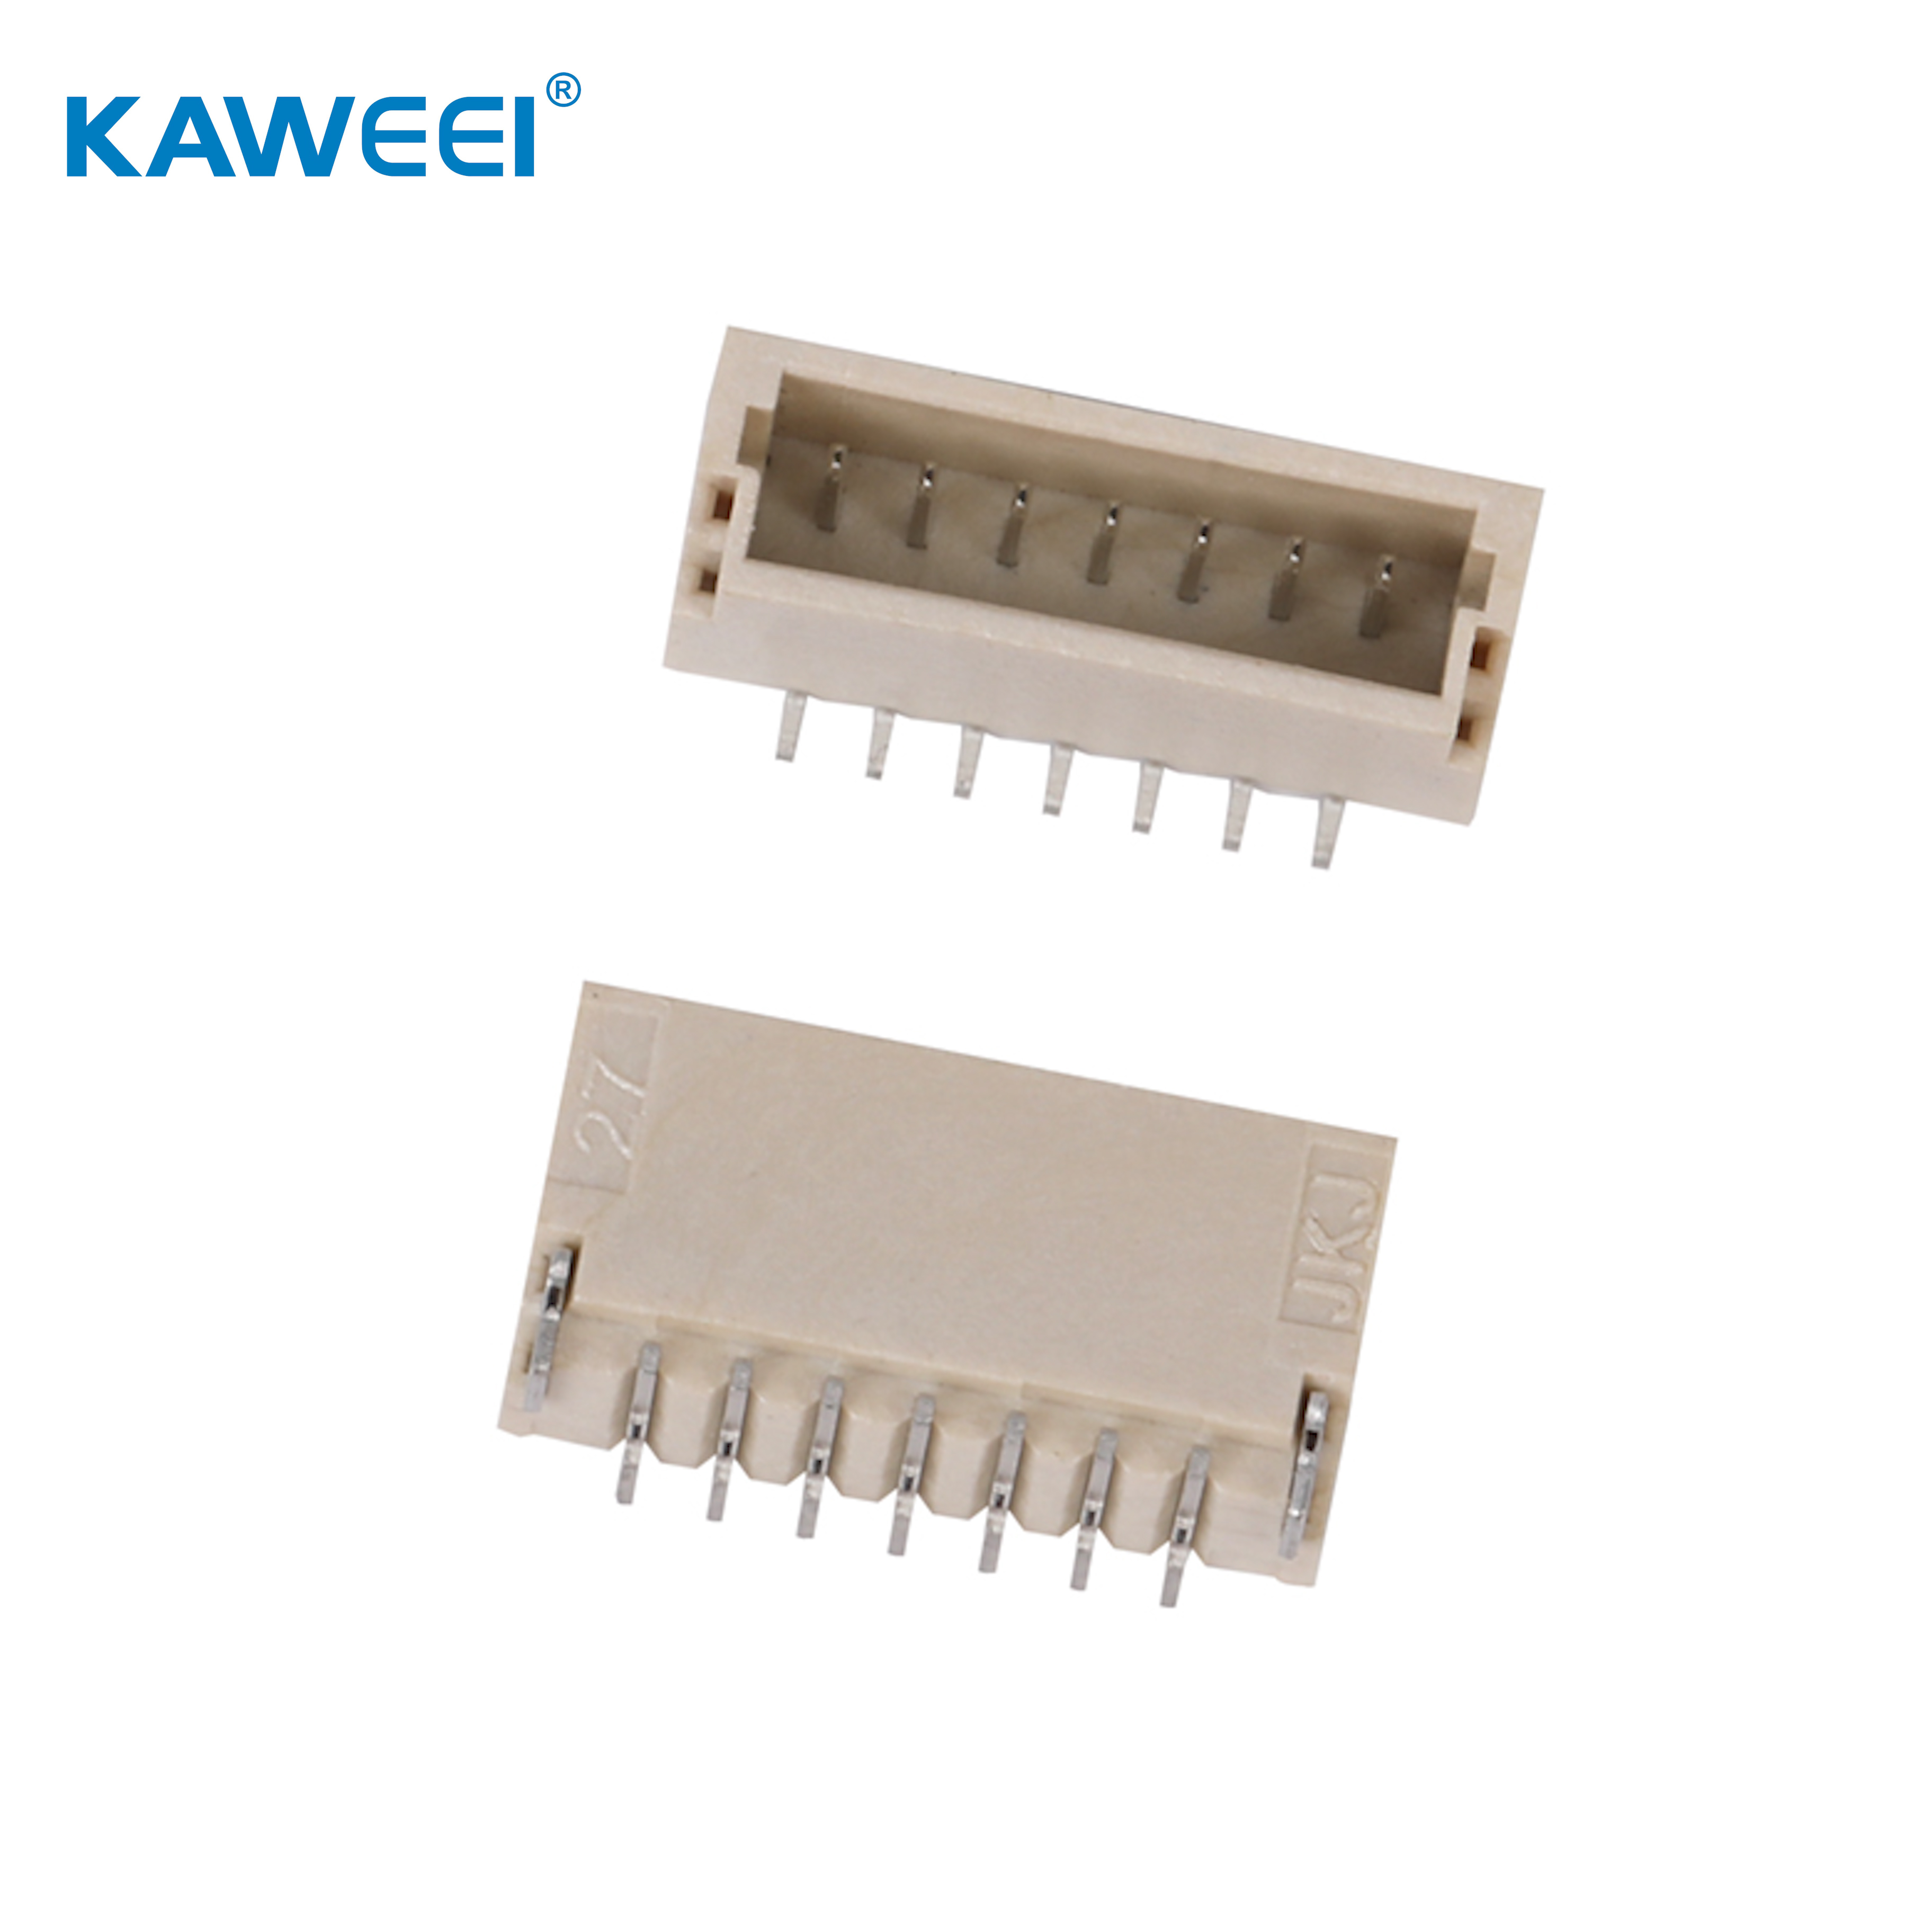 1.0mm pitch wire sa board connector PCB connector